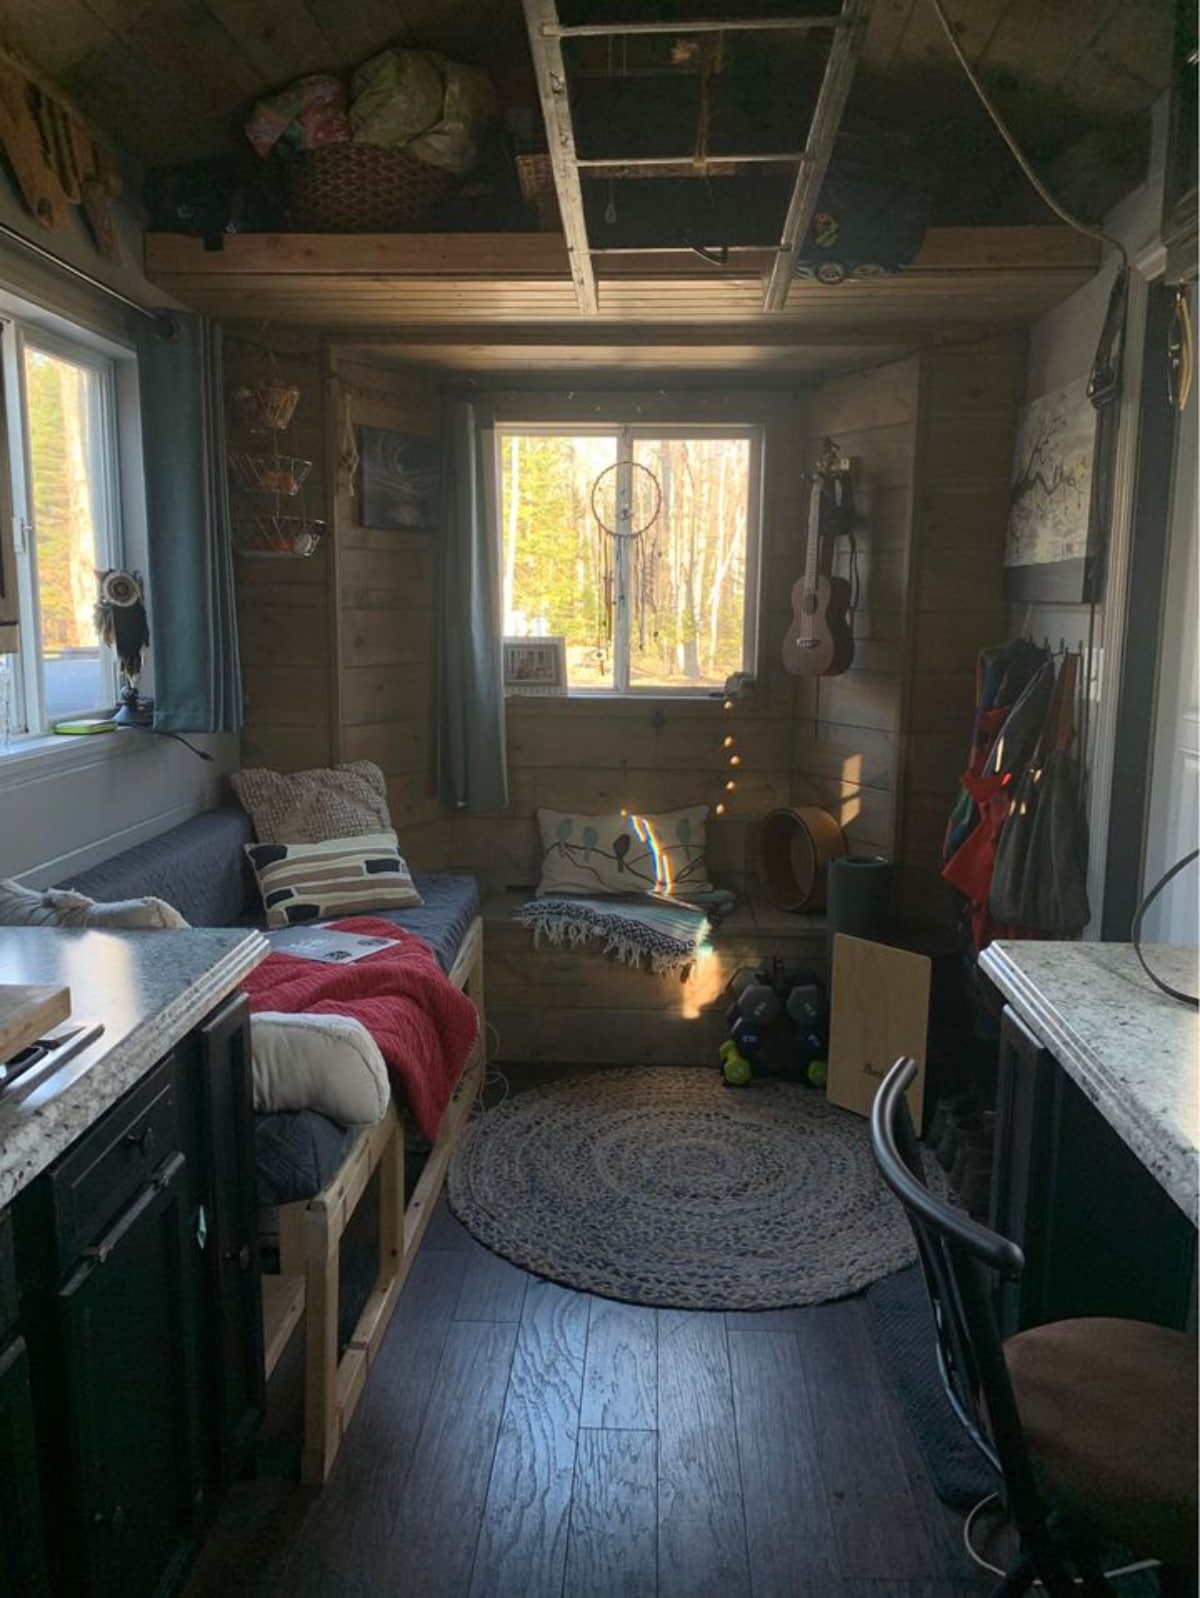 Living area of 180 sf Adorable Tiny House on Wheels has a large windows and L shaped sitting area